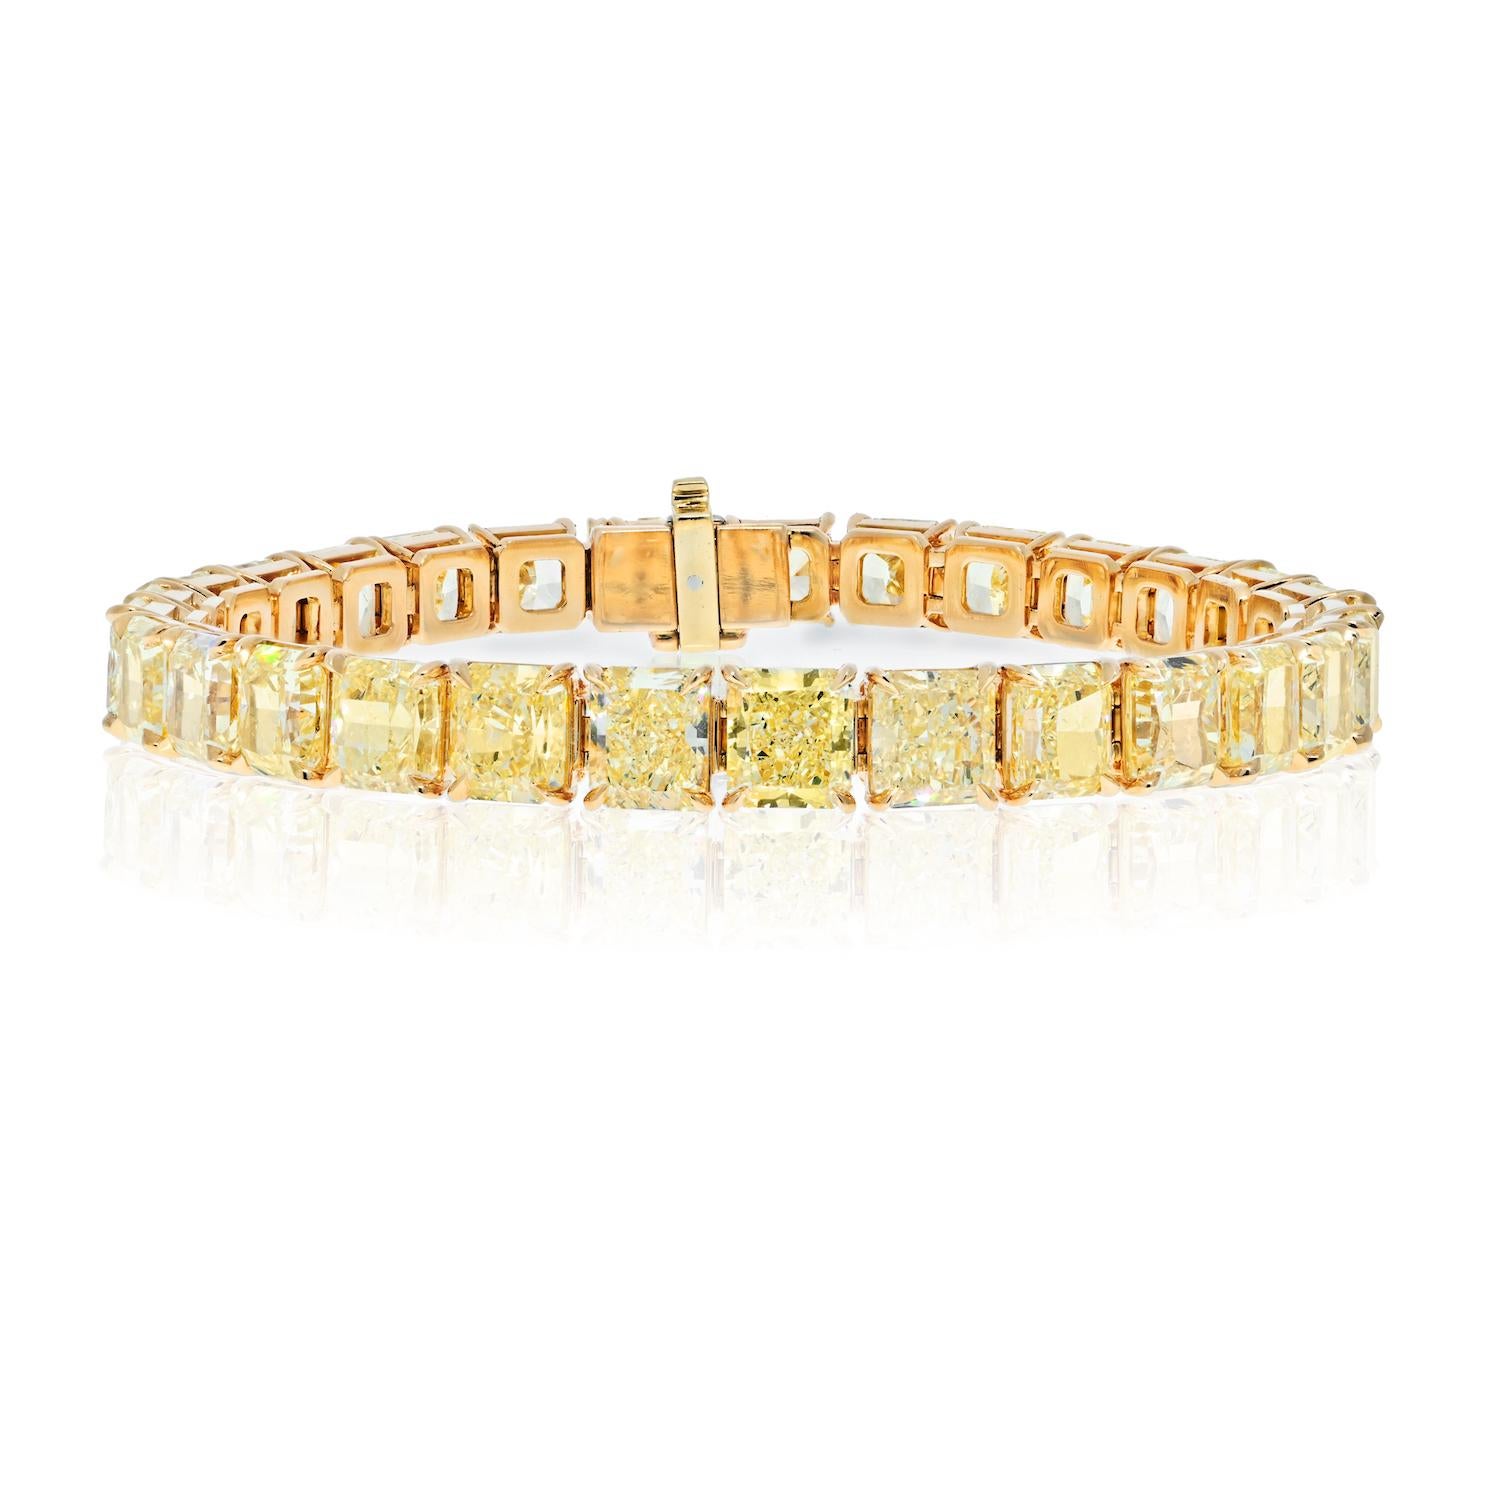 Handmade diamond bracelet crafted in 18 k yellow gold, mounted with 29 diamonds of radiant cut. Each diamond is of fancy yellow color and is over 1 carat each. 
Diamonds vary from VVS2 to VS2 clarity and are all consistent in color.
Bracelet length: